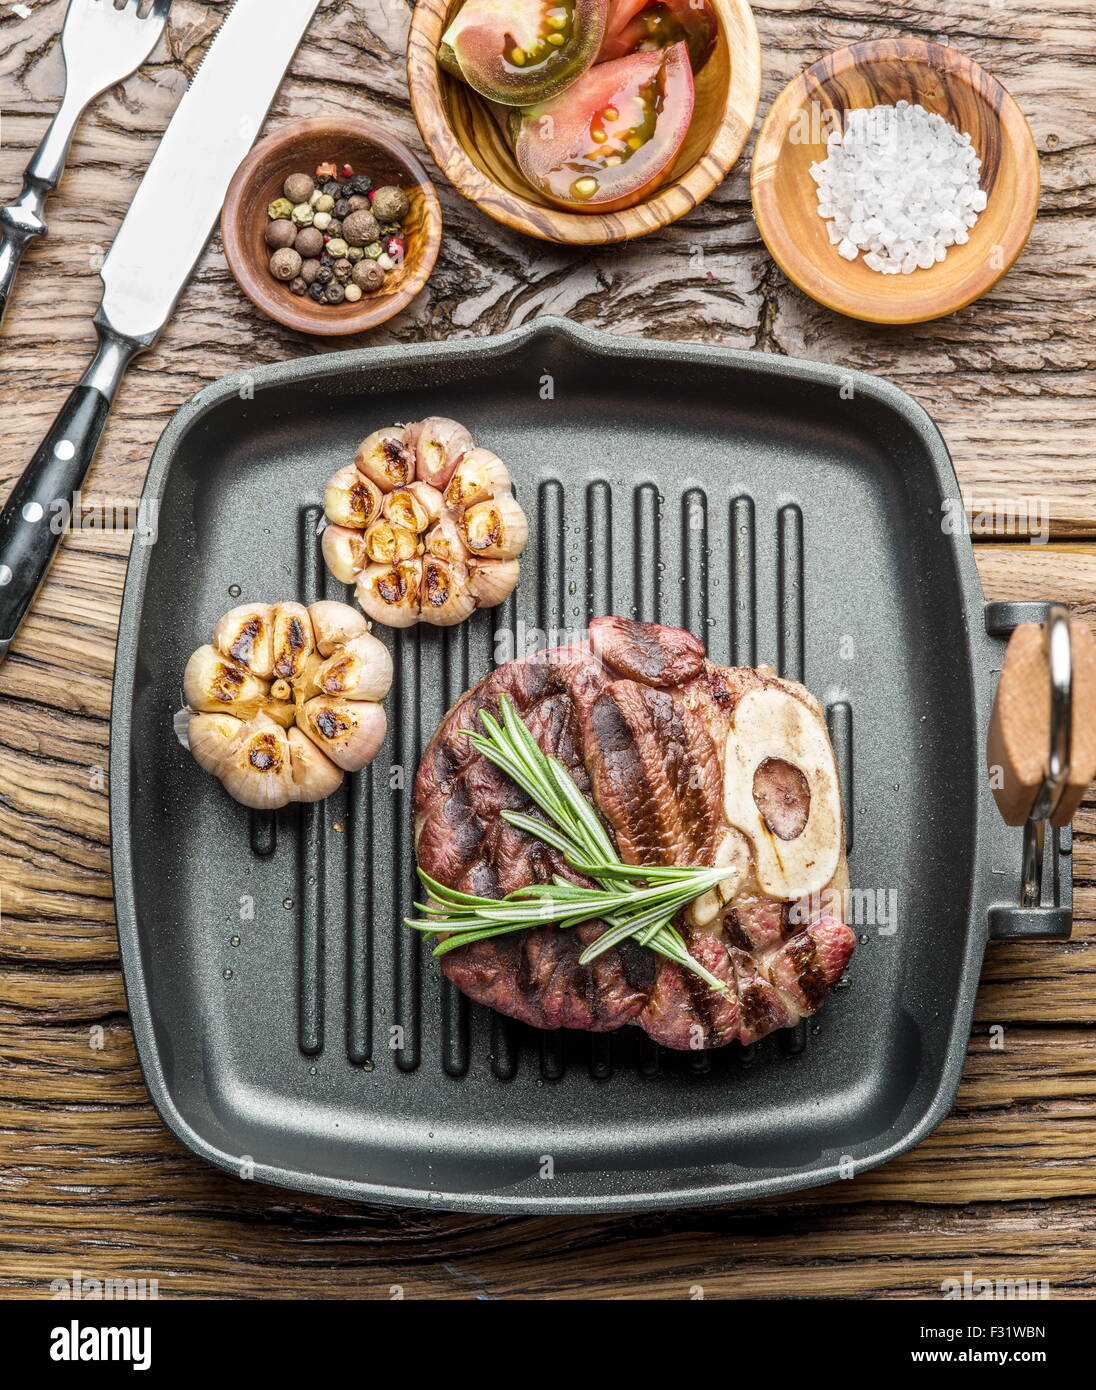 Beef steak with spices on pan on wooden table. Stock Photo